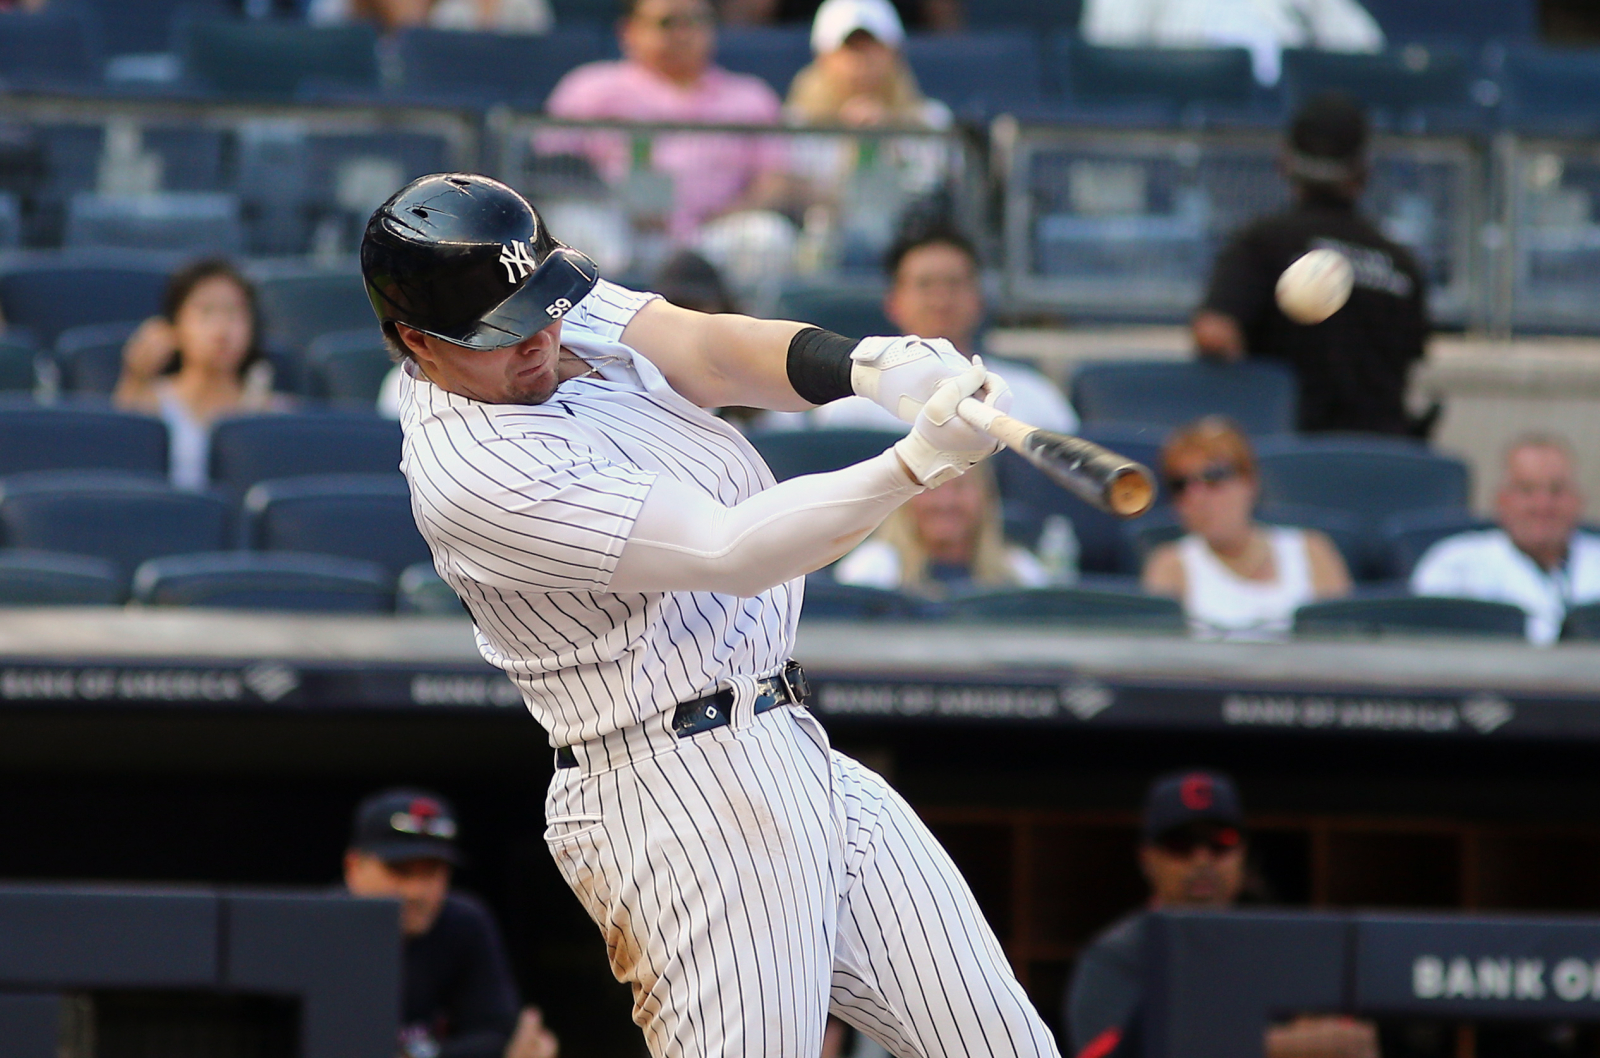 Why the New York Yankees should consider trading Luke Voit